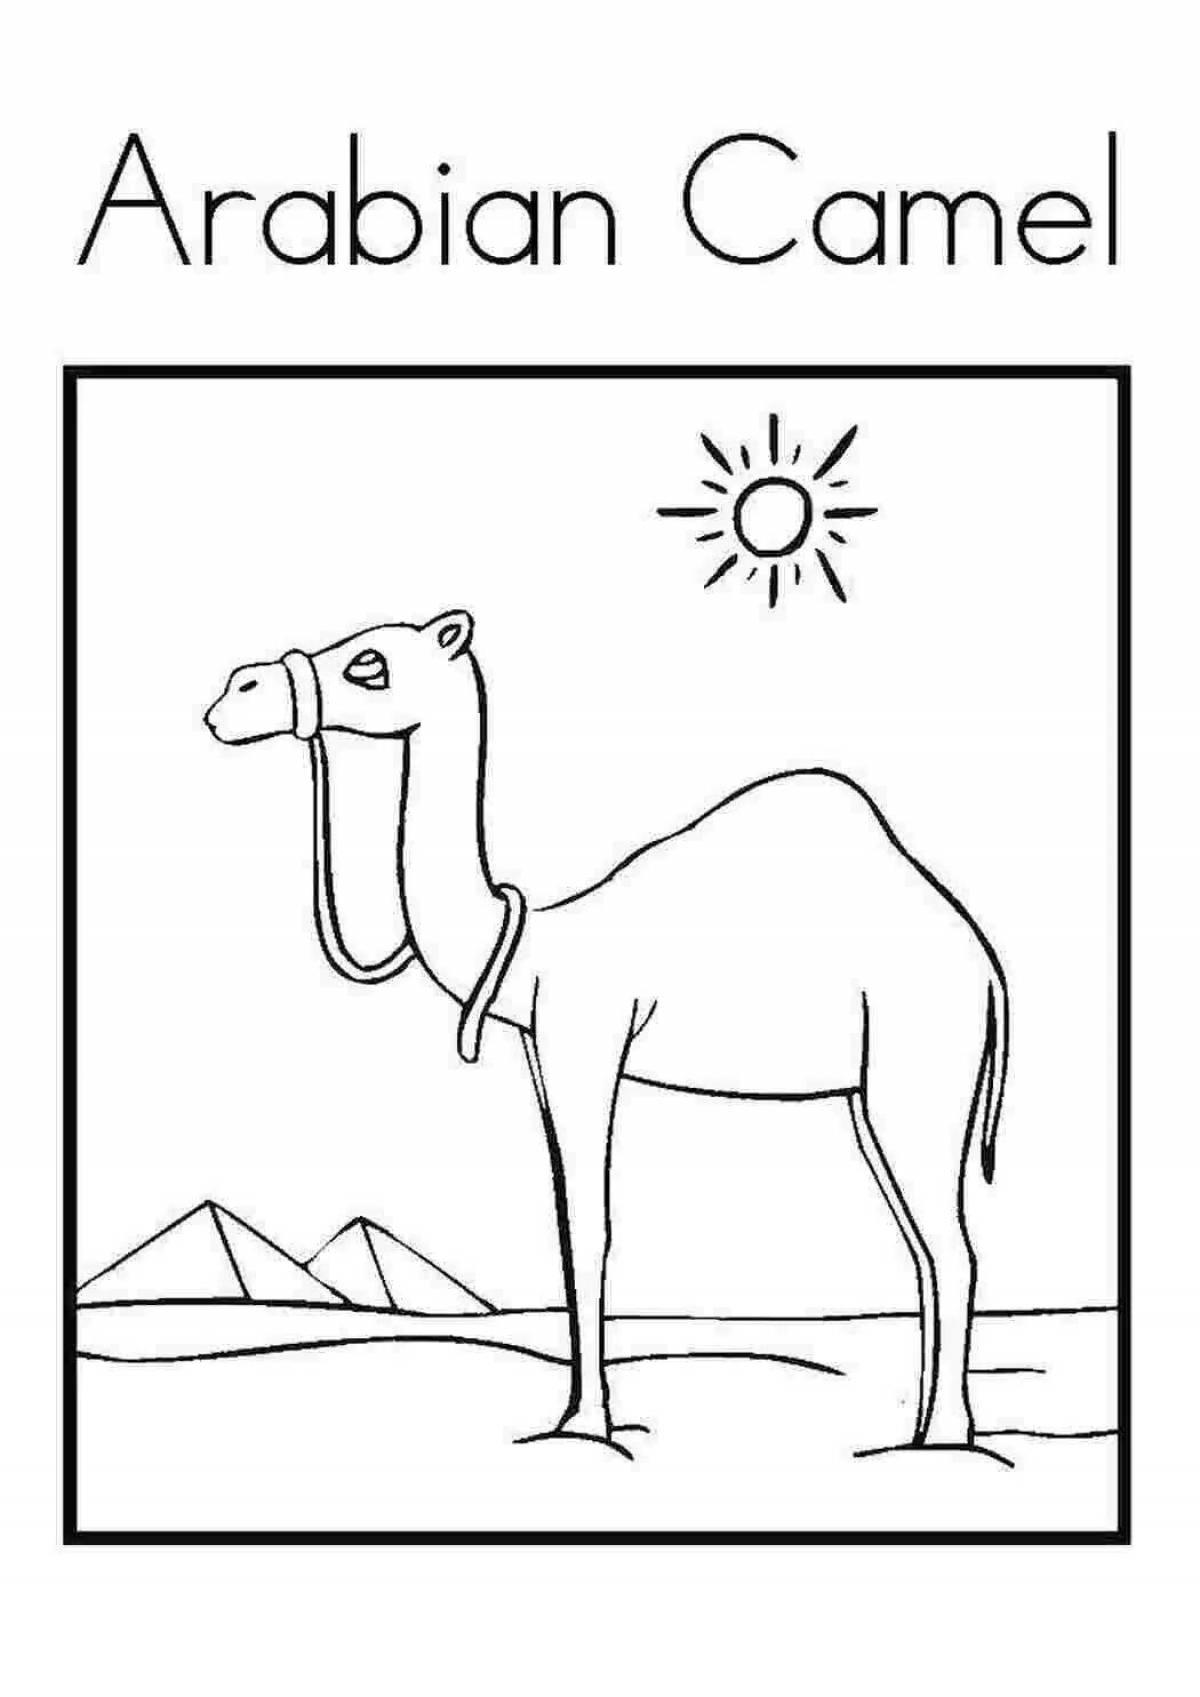 Vibrant desert coloring page for kids